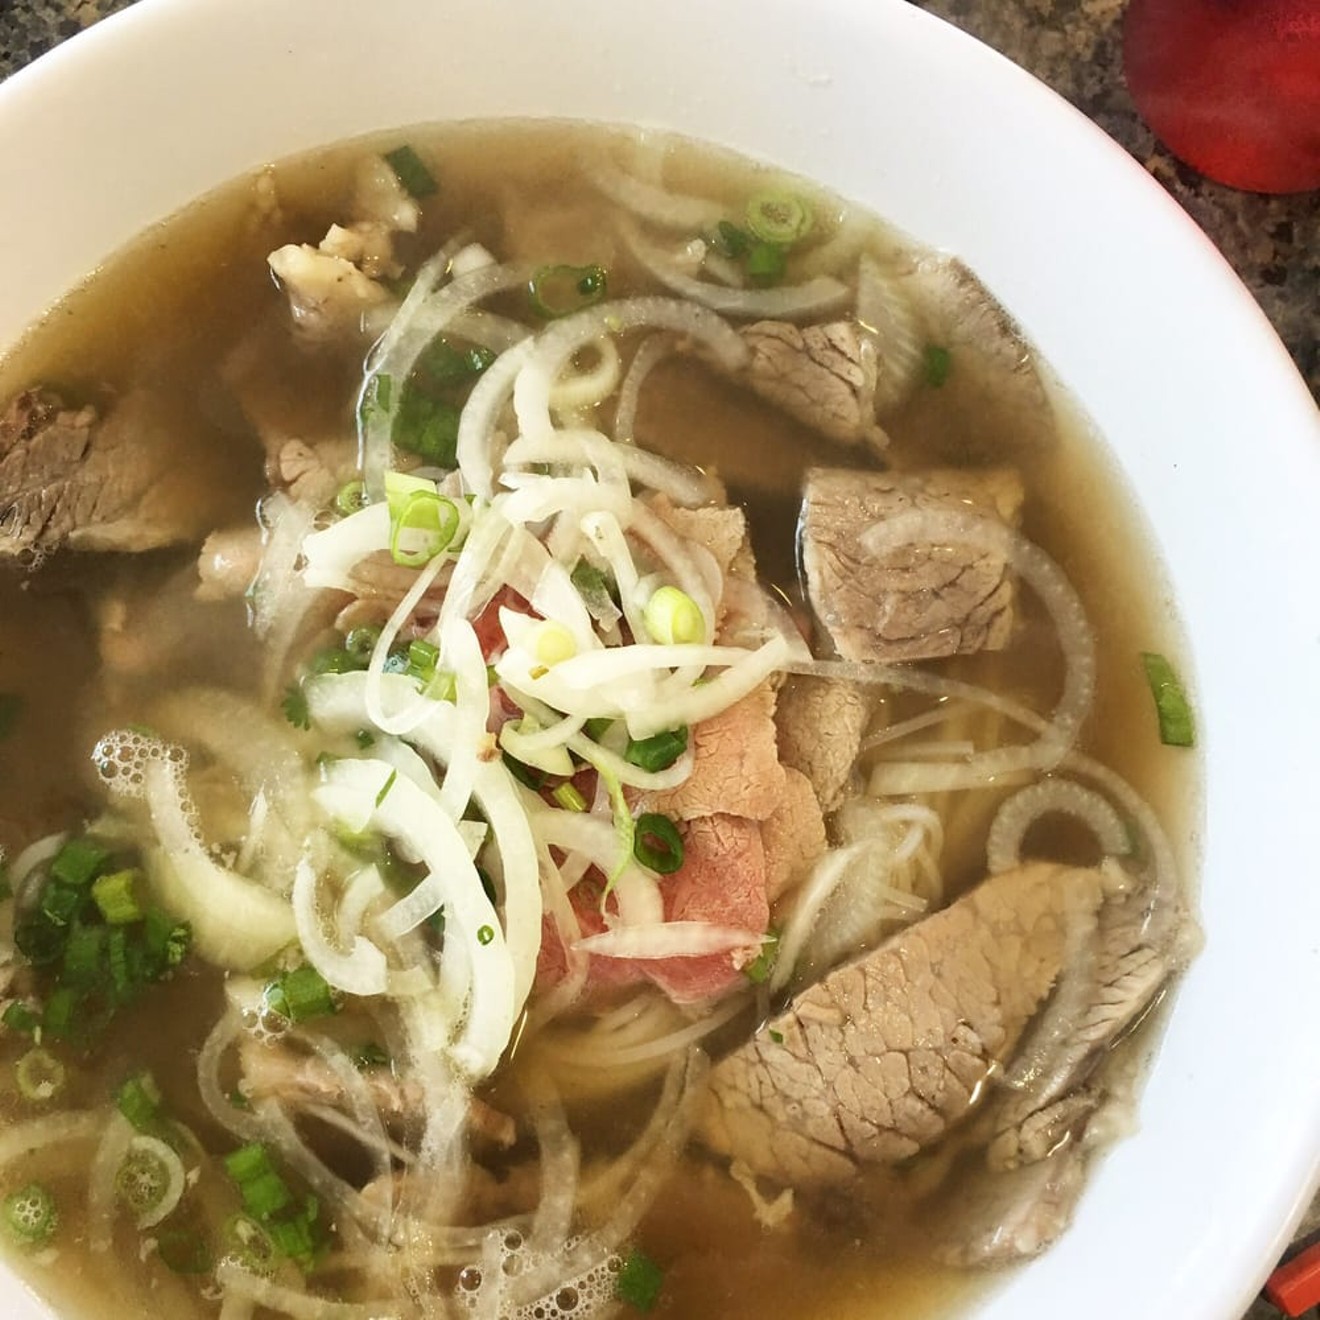 The pho at Pho Binh on Belliare is Chef Chris Shepherd's pick for best pho.